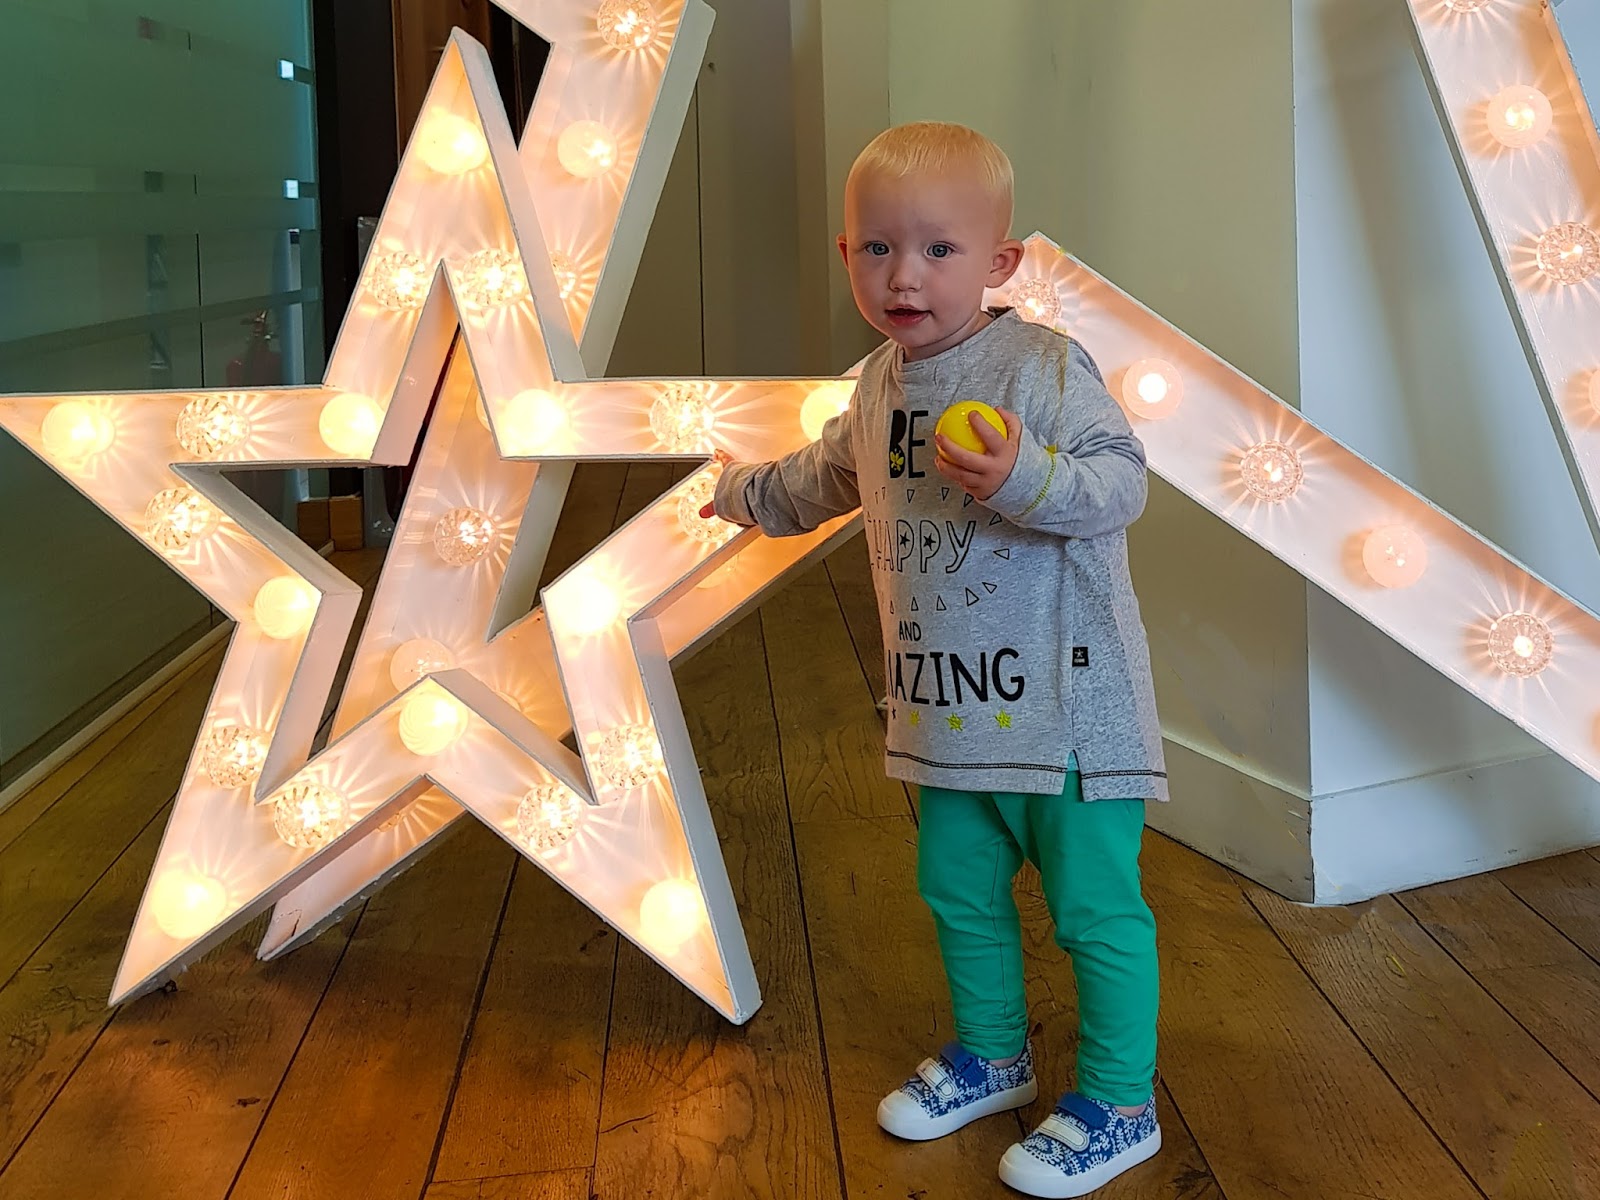 My toddler in a Boots Mini Club slogan tee in front of lit up stars